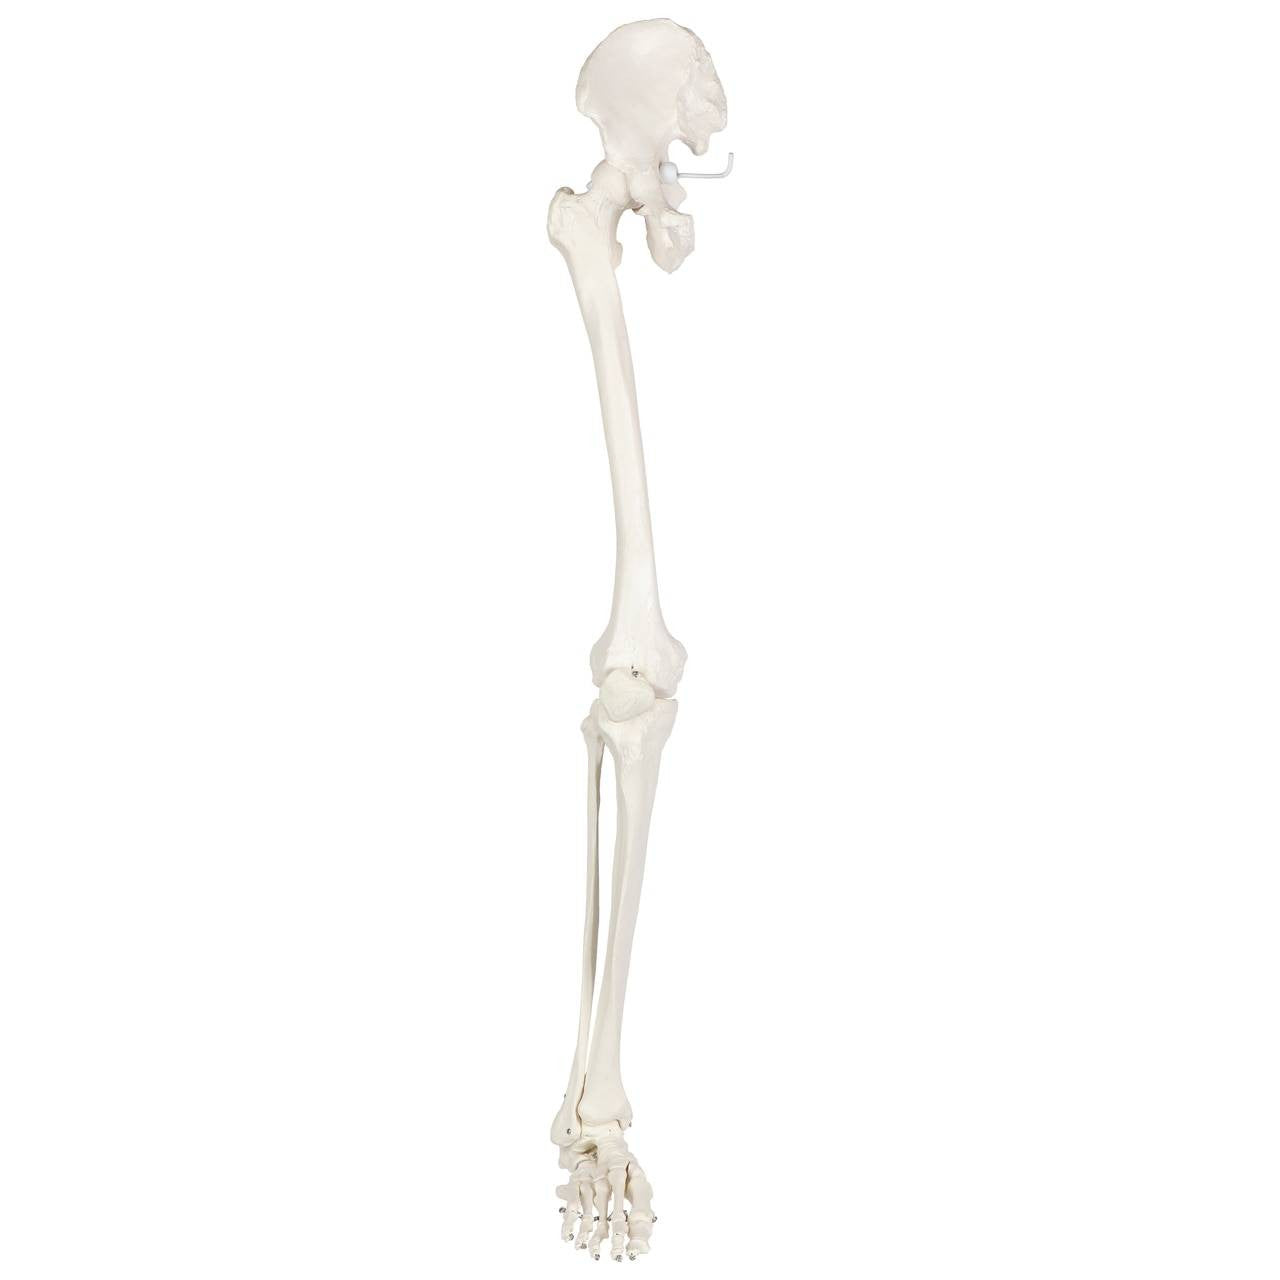 Evotech Scientific Life-Size 36" Human Leg Skeleton with Hip Joint and Articulated Foot Anatomy Model